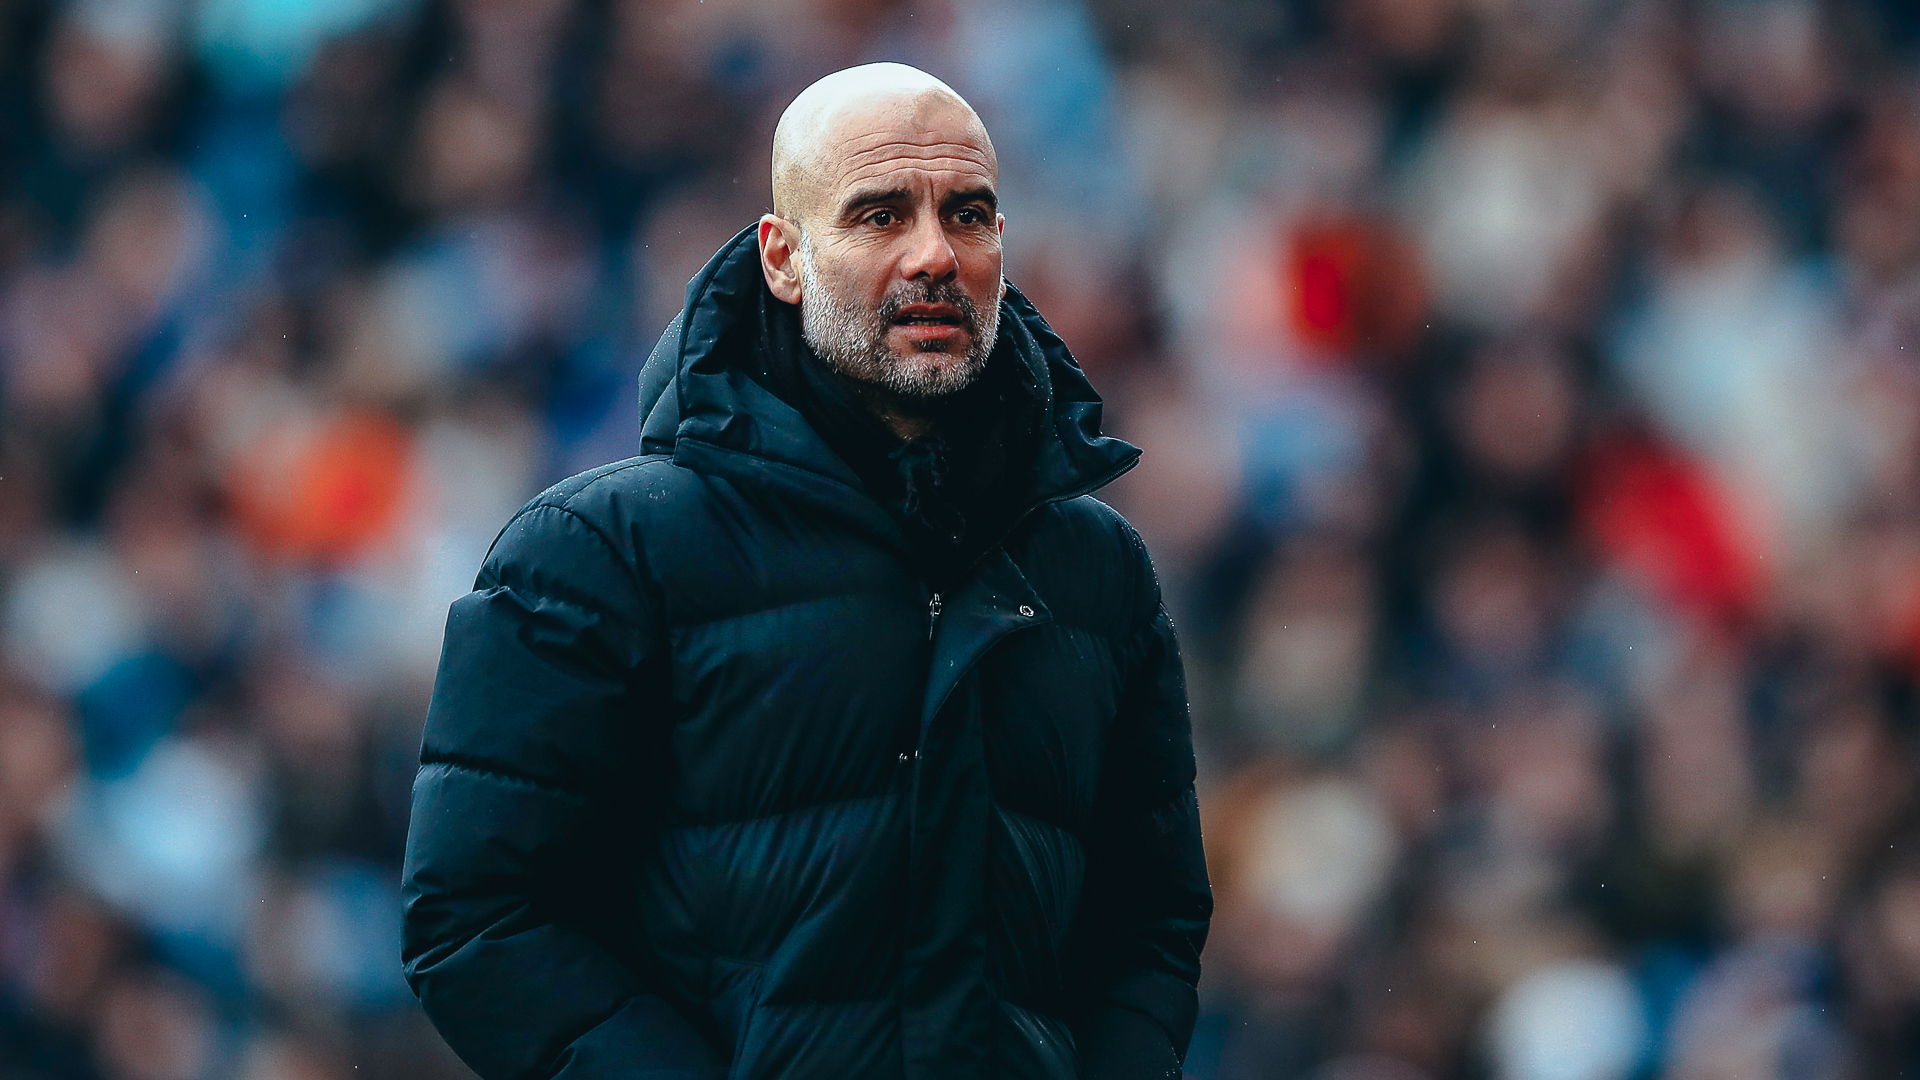 We must live with the pressure' says Guardiola